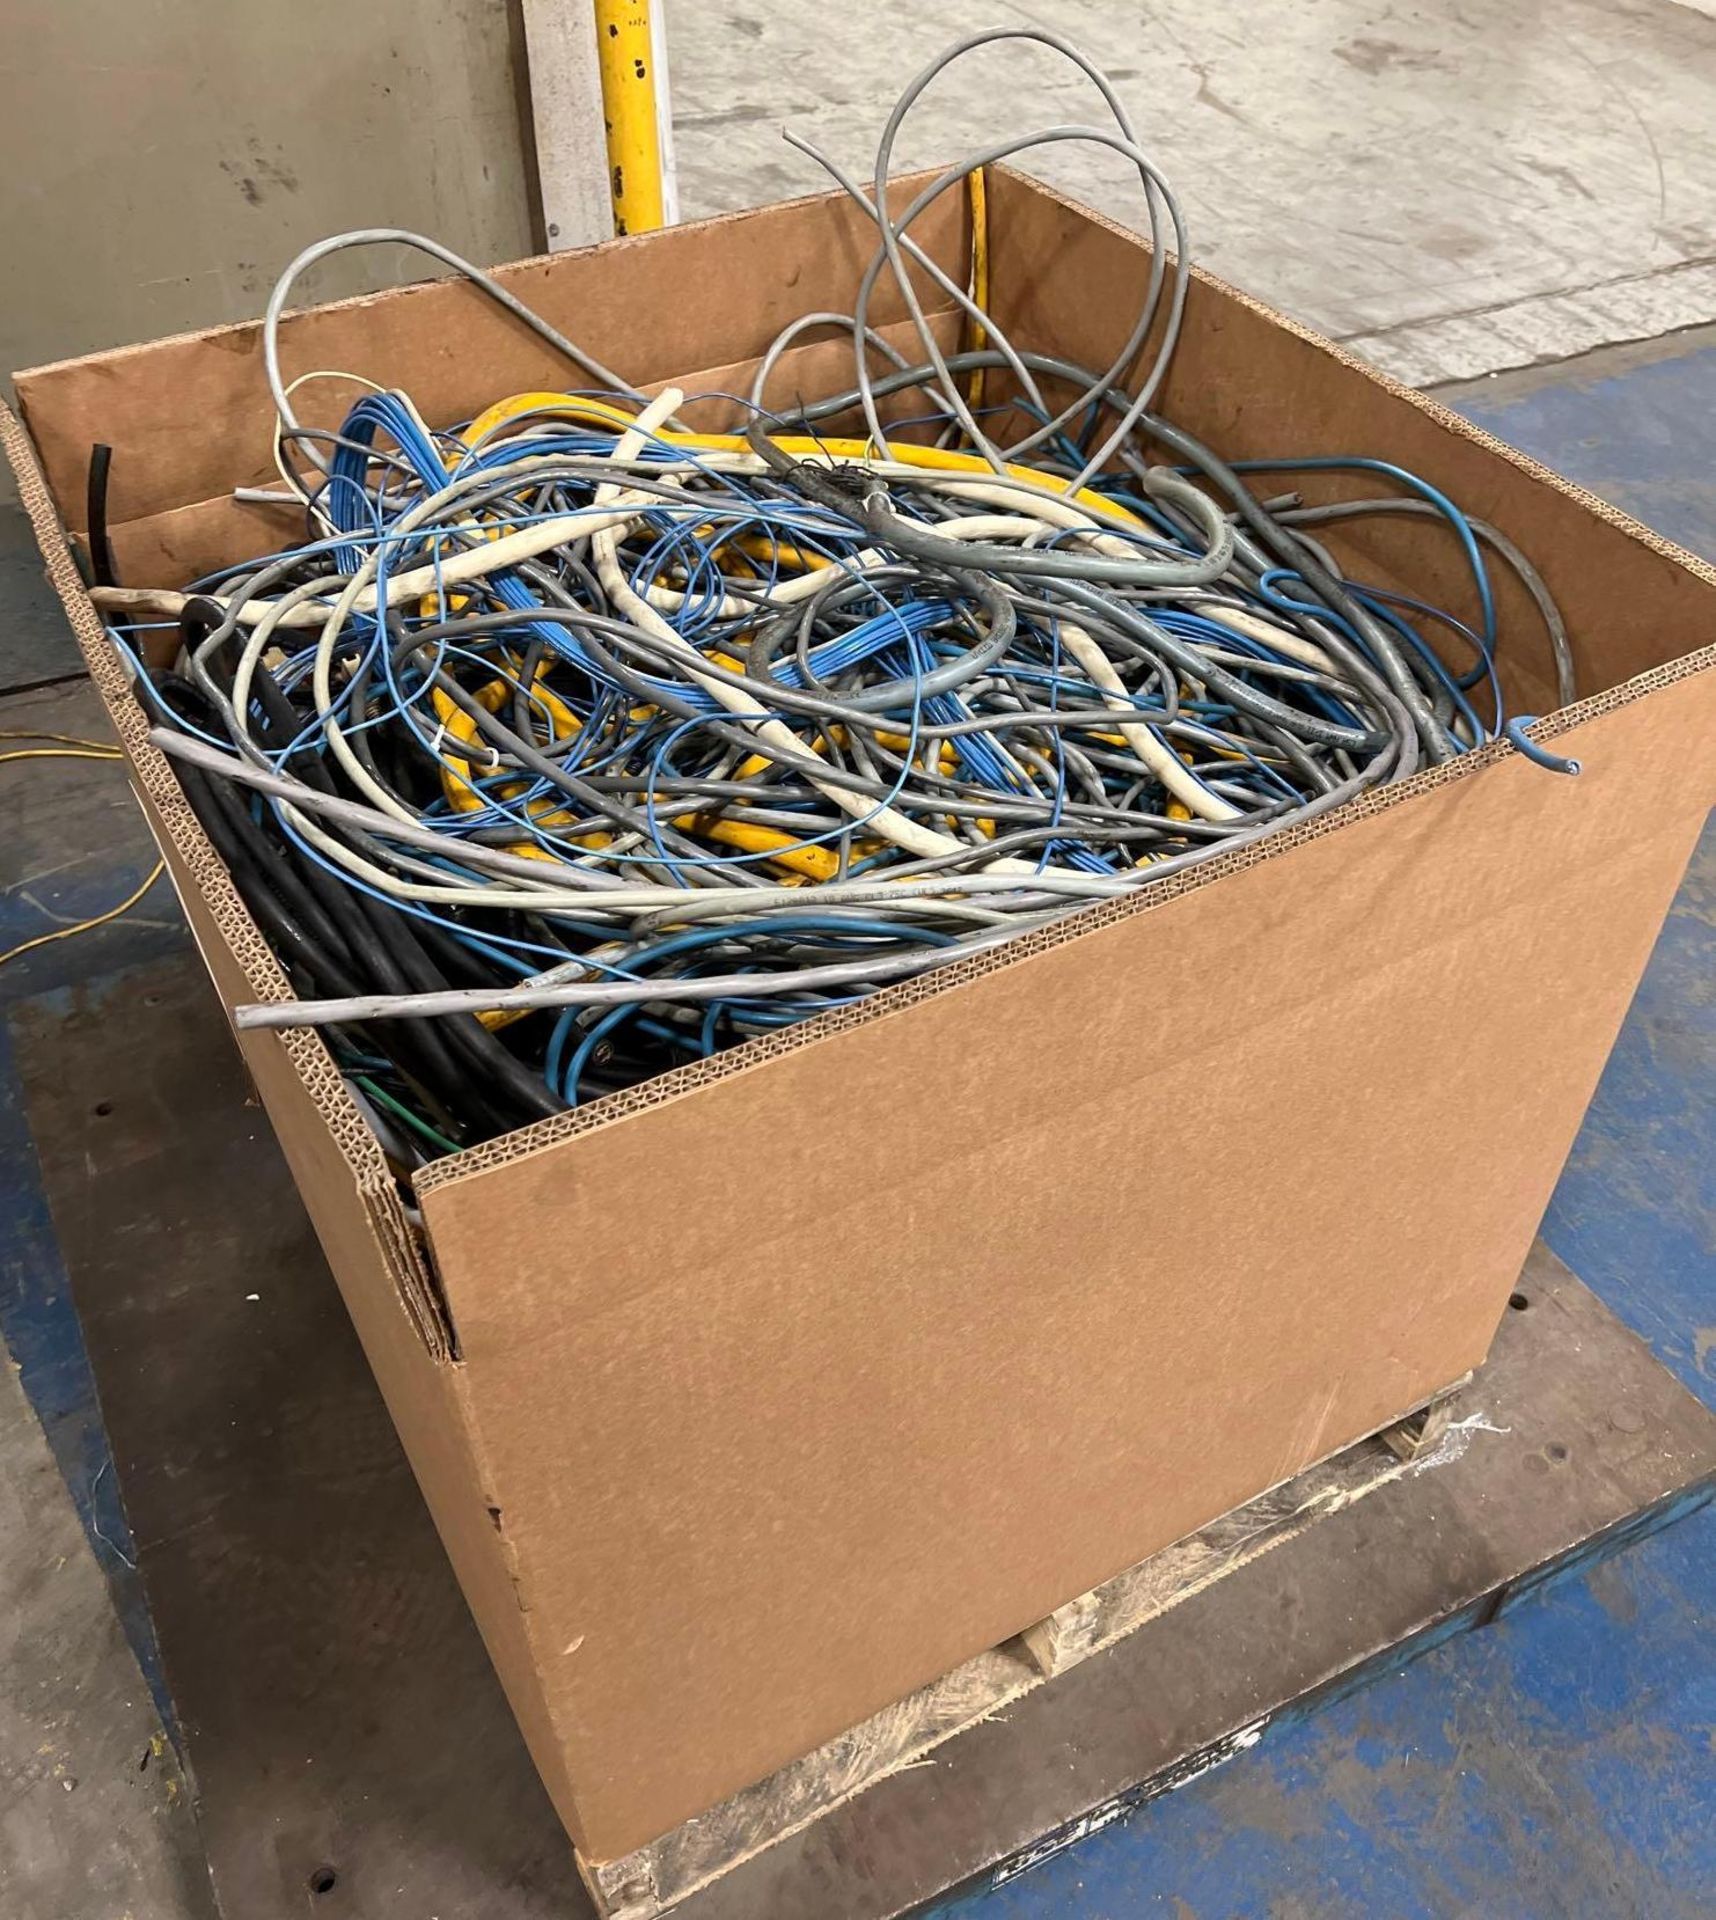 Scrap Wire (Insulated) 194 Lbs. (Includes Tare Weight)